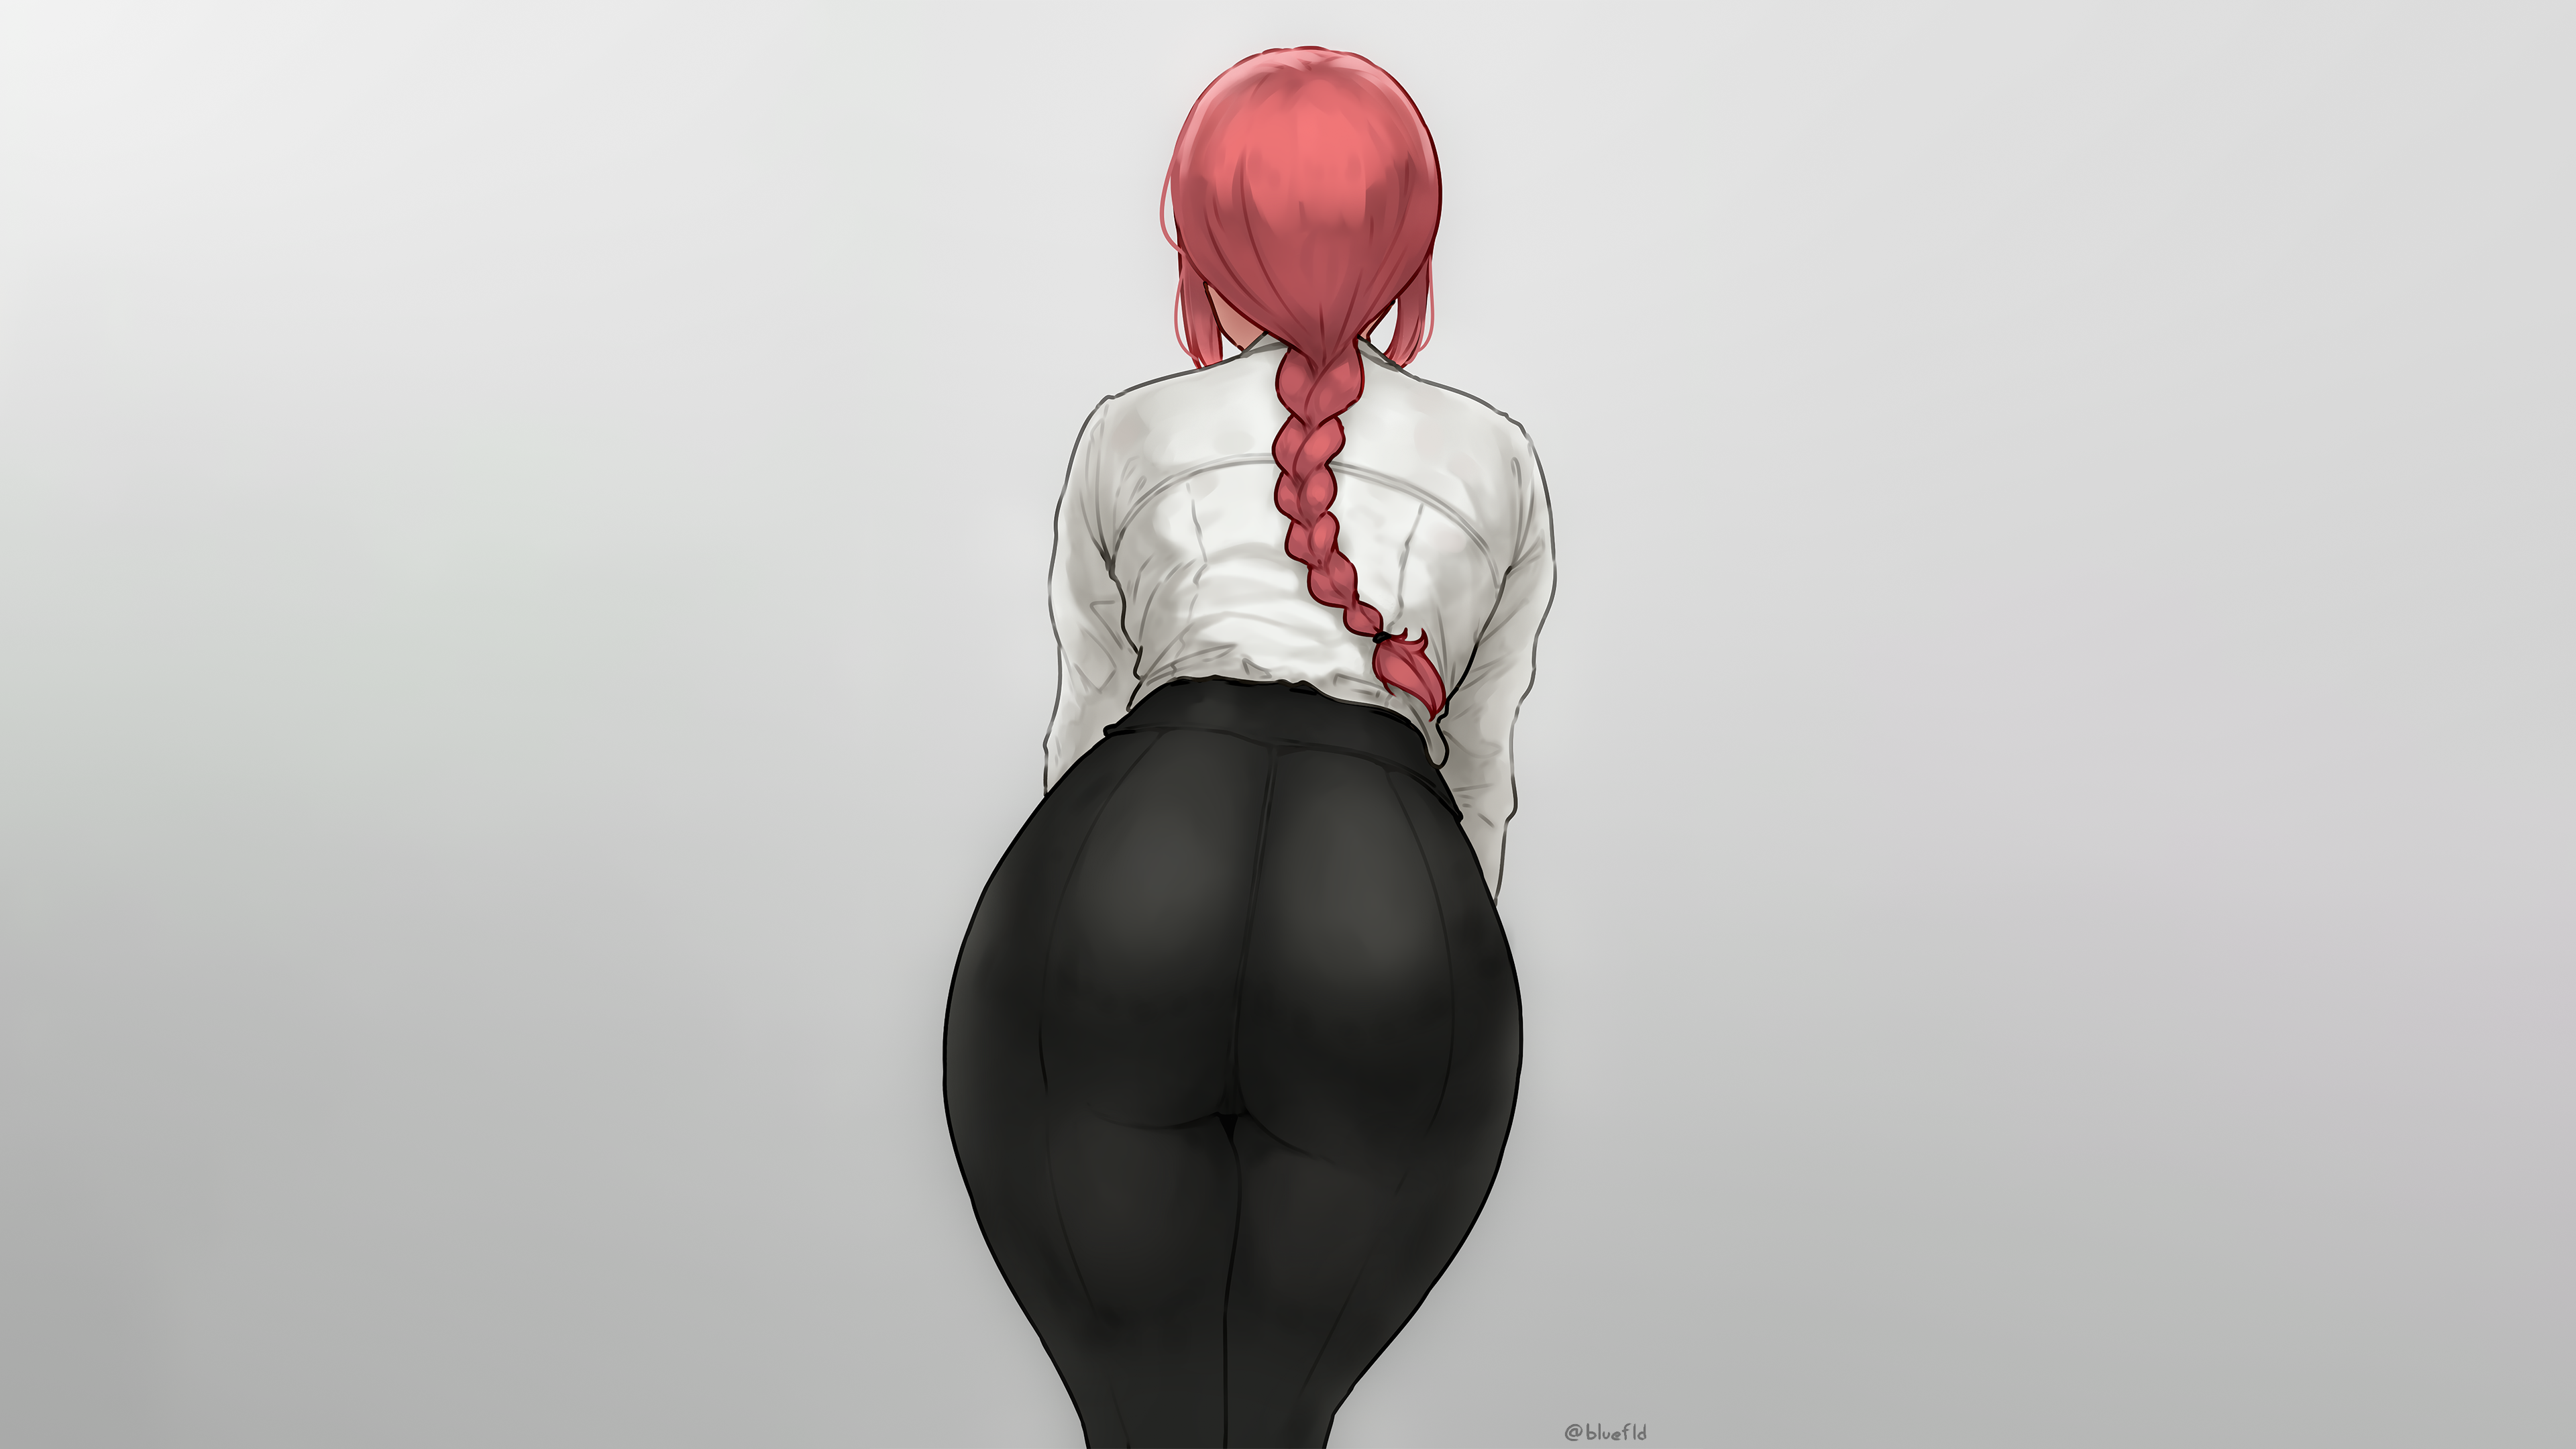 Anime 3840x2160 bluefield Makima (Chainsaw Man) Chainsaw Man redhead long hair white tops black pants tight pants looking away ass bent over simple background gray background digital art 2D fan art anime anime girls minimalism braids